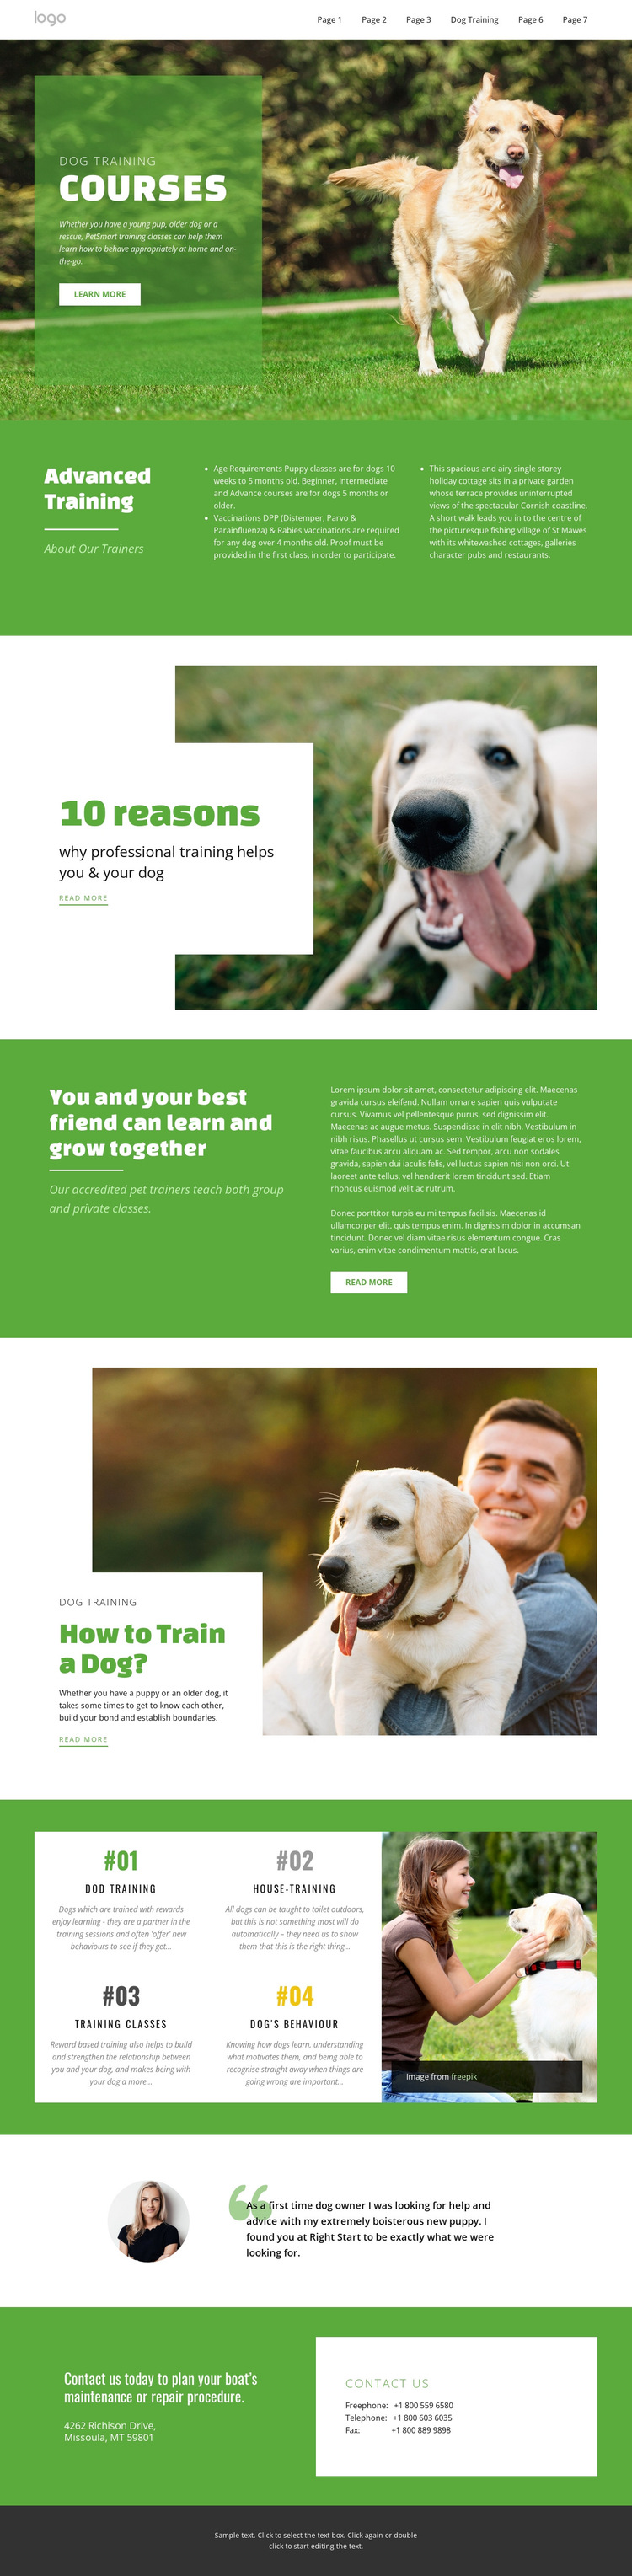 Training courses for pets HTML5 Template